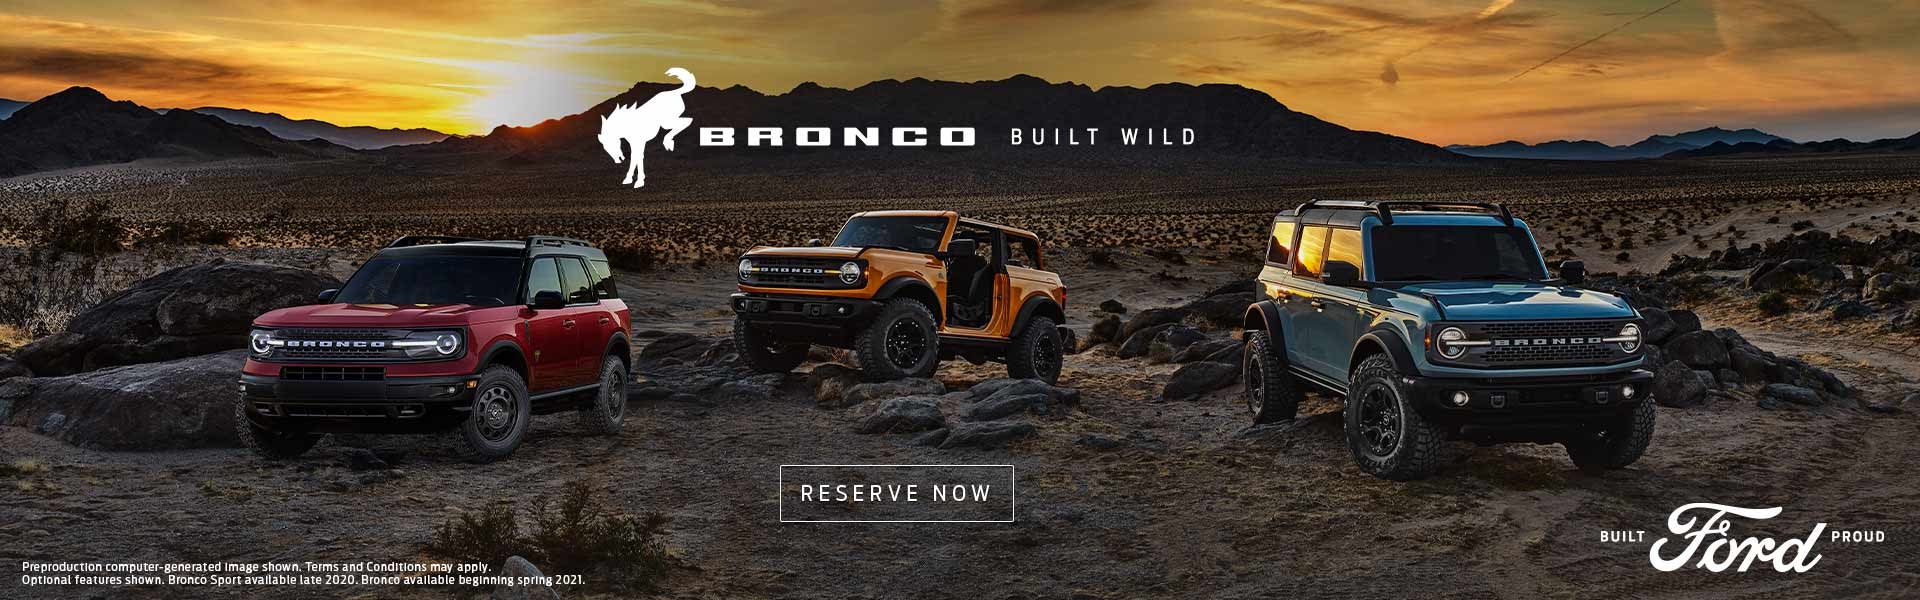 Ford Bronco Reserve Now at Woodland Ford Ca